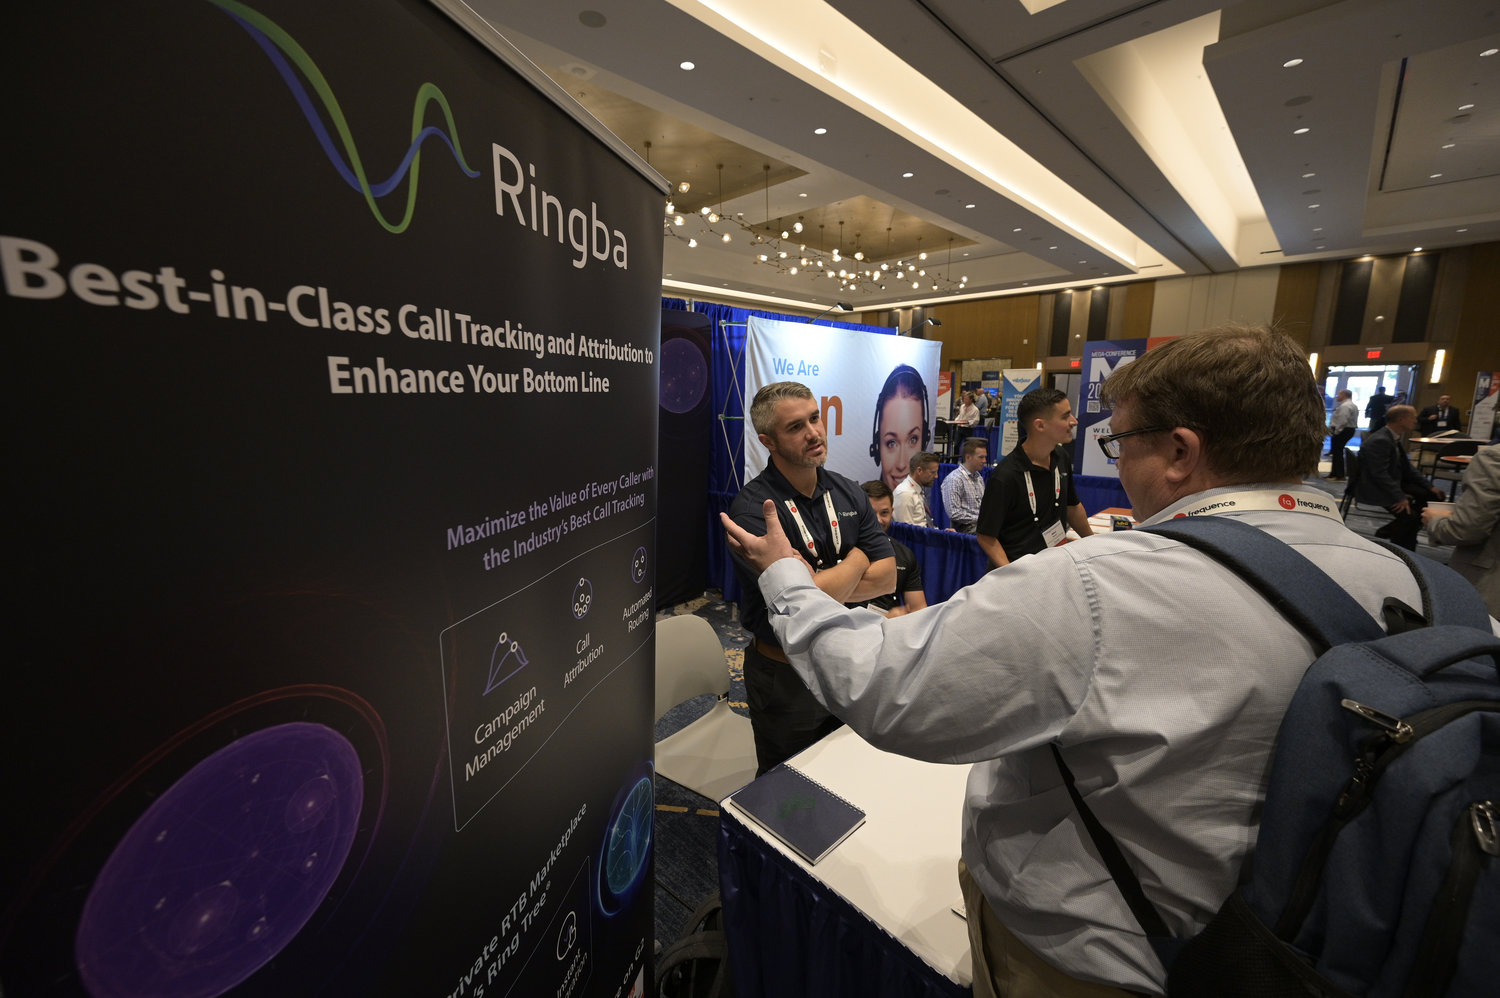 Ringba was an exhibitor in the Town Square and our communications sponsor. (Photo by Phelan M. Ebenhack)